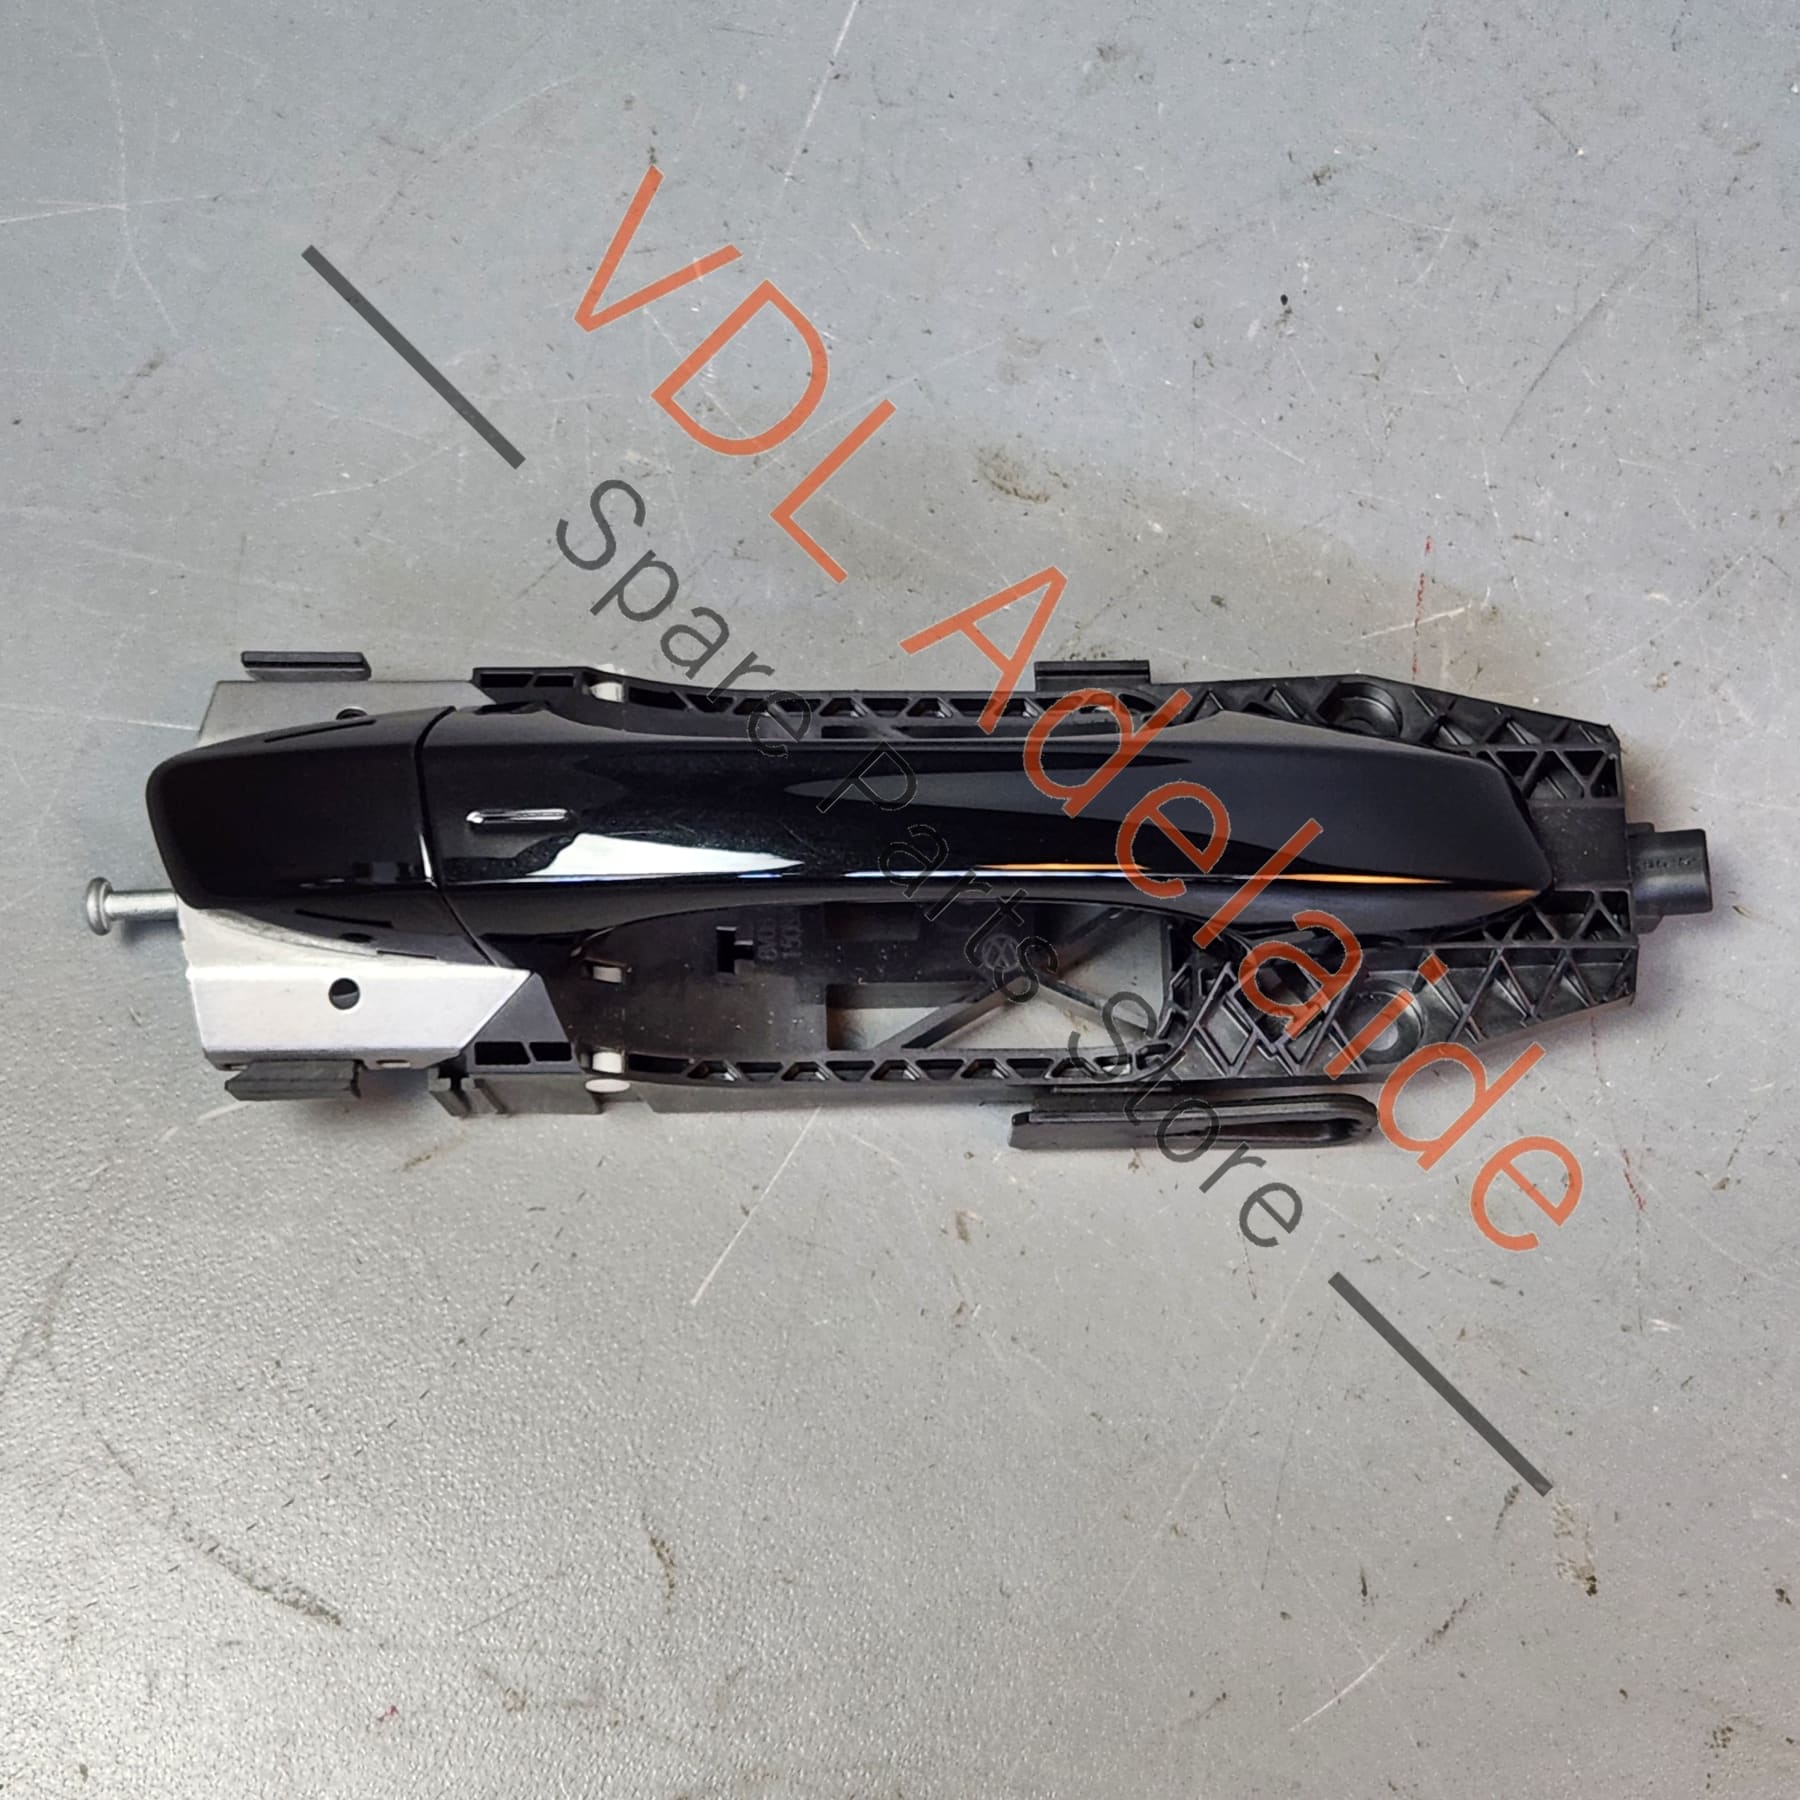 5G0837205NGRU 5G0839167DGRU 8V0839885 5G0837205Q Audi Q3 RSQ3 F3 Right Side Exterior Door Handle for Keyless Entry and Mounting Bar 8V0837885 5G0837206R GRU / 5G0837206Q